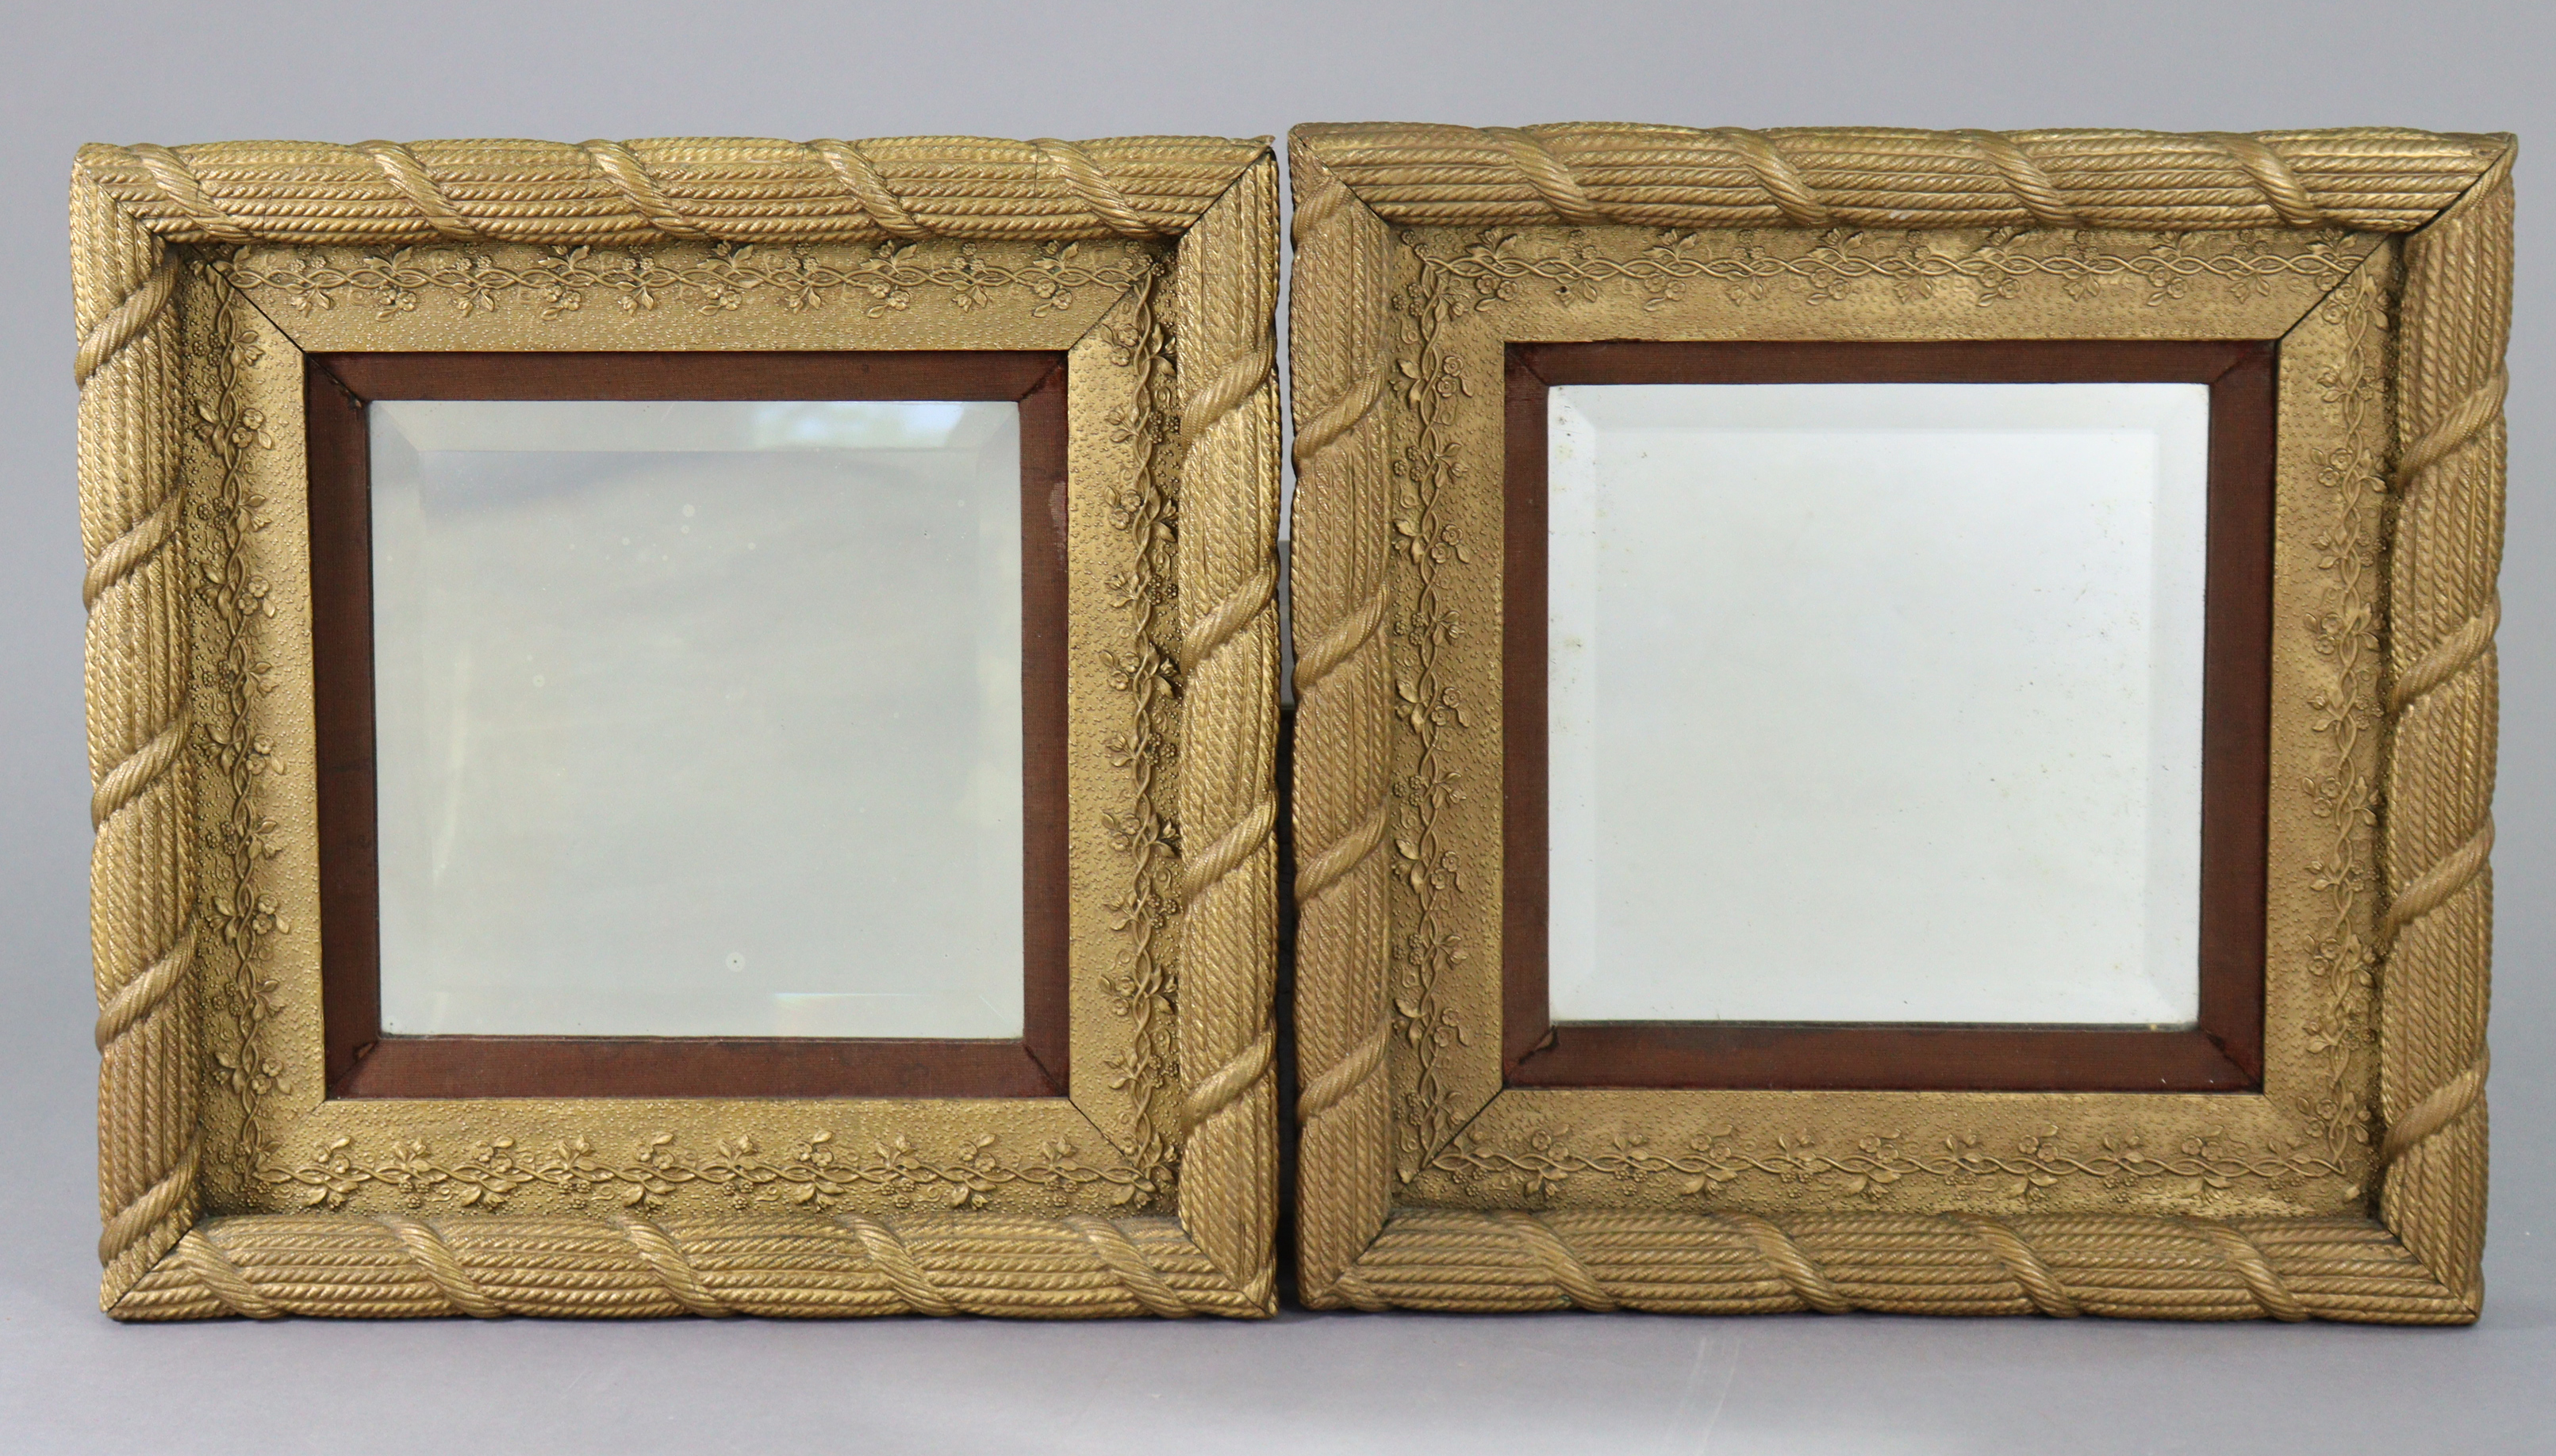 A pair of 19th century giltwood & gesso rectangular wall mirrors, inset bevelled plates in rope-